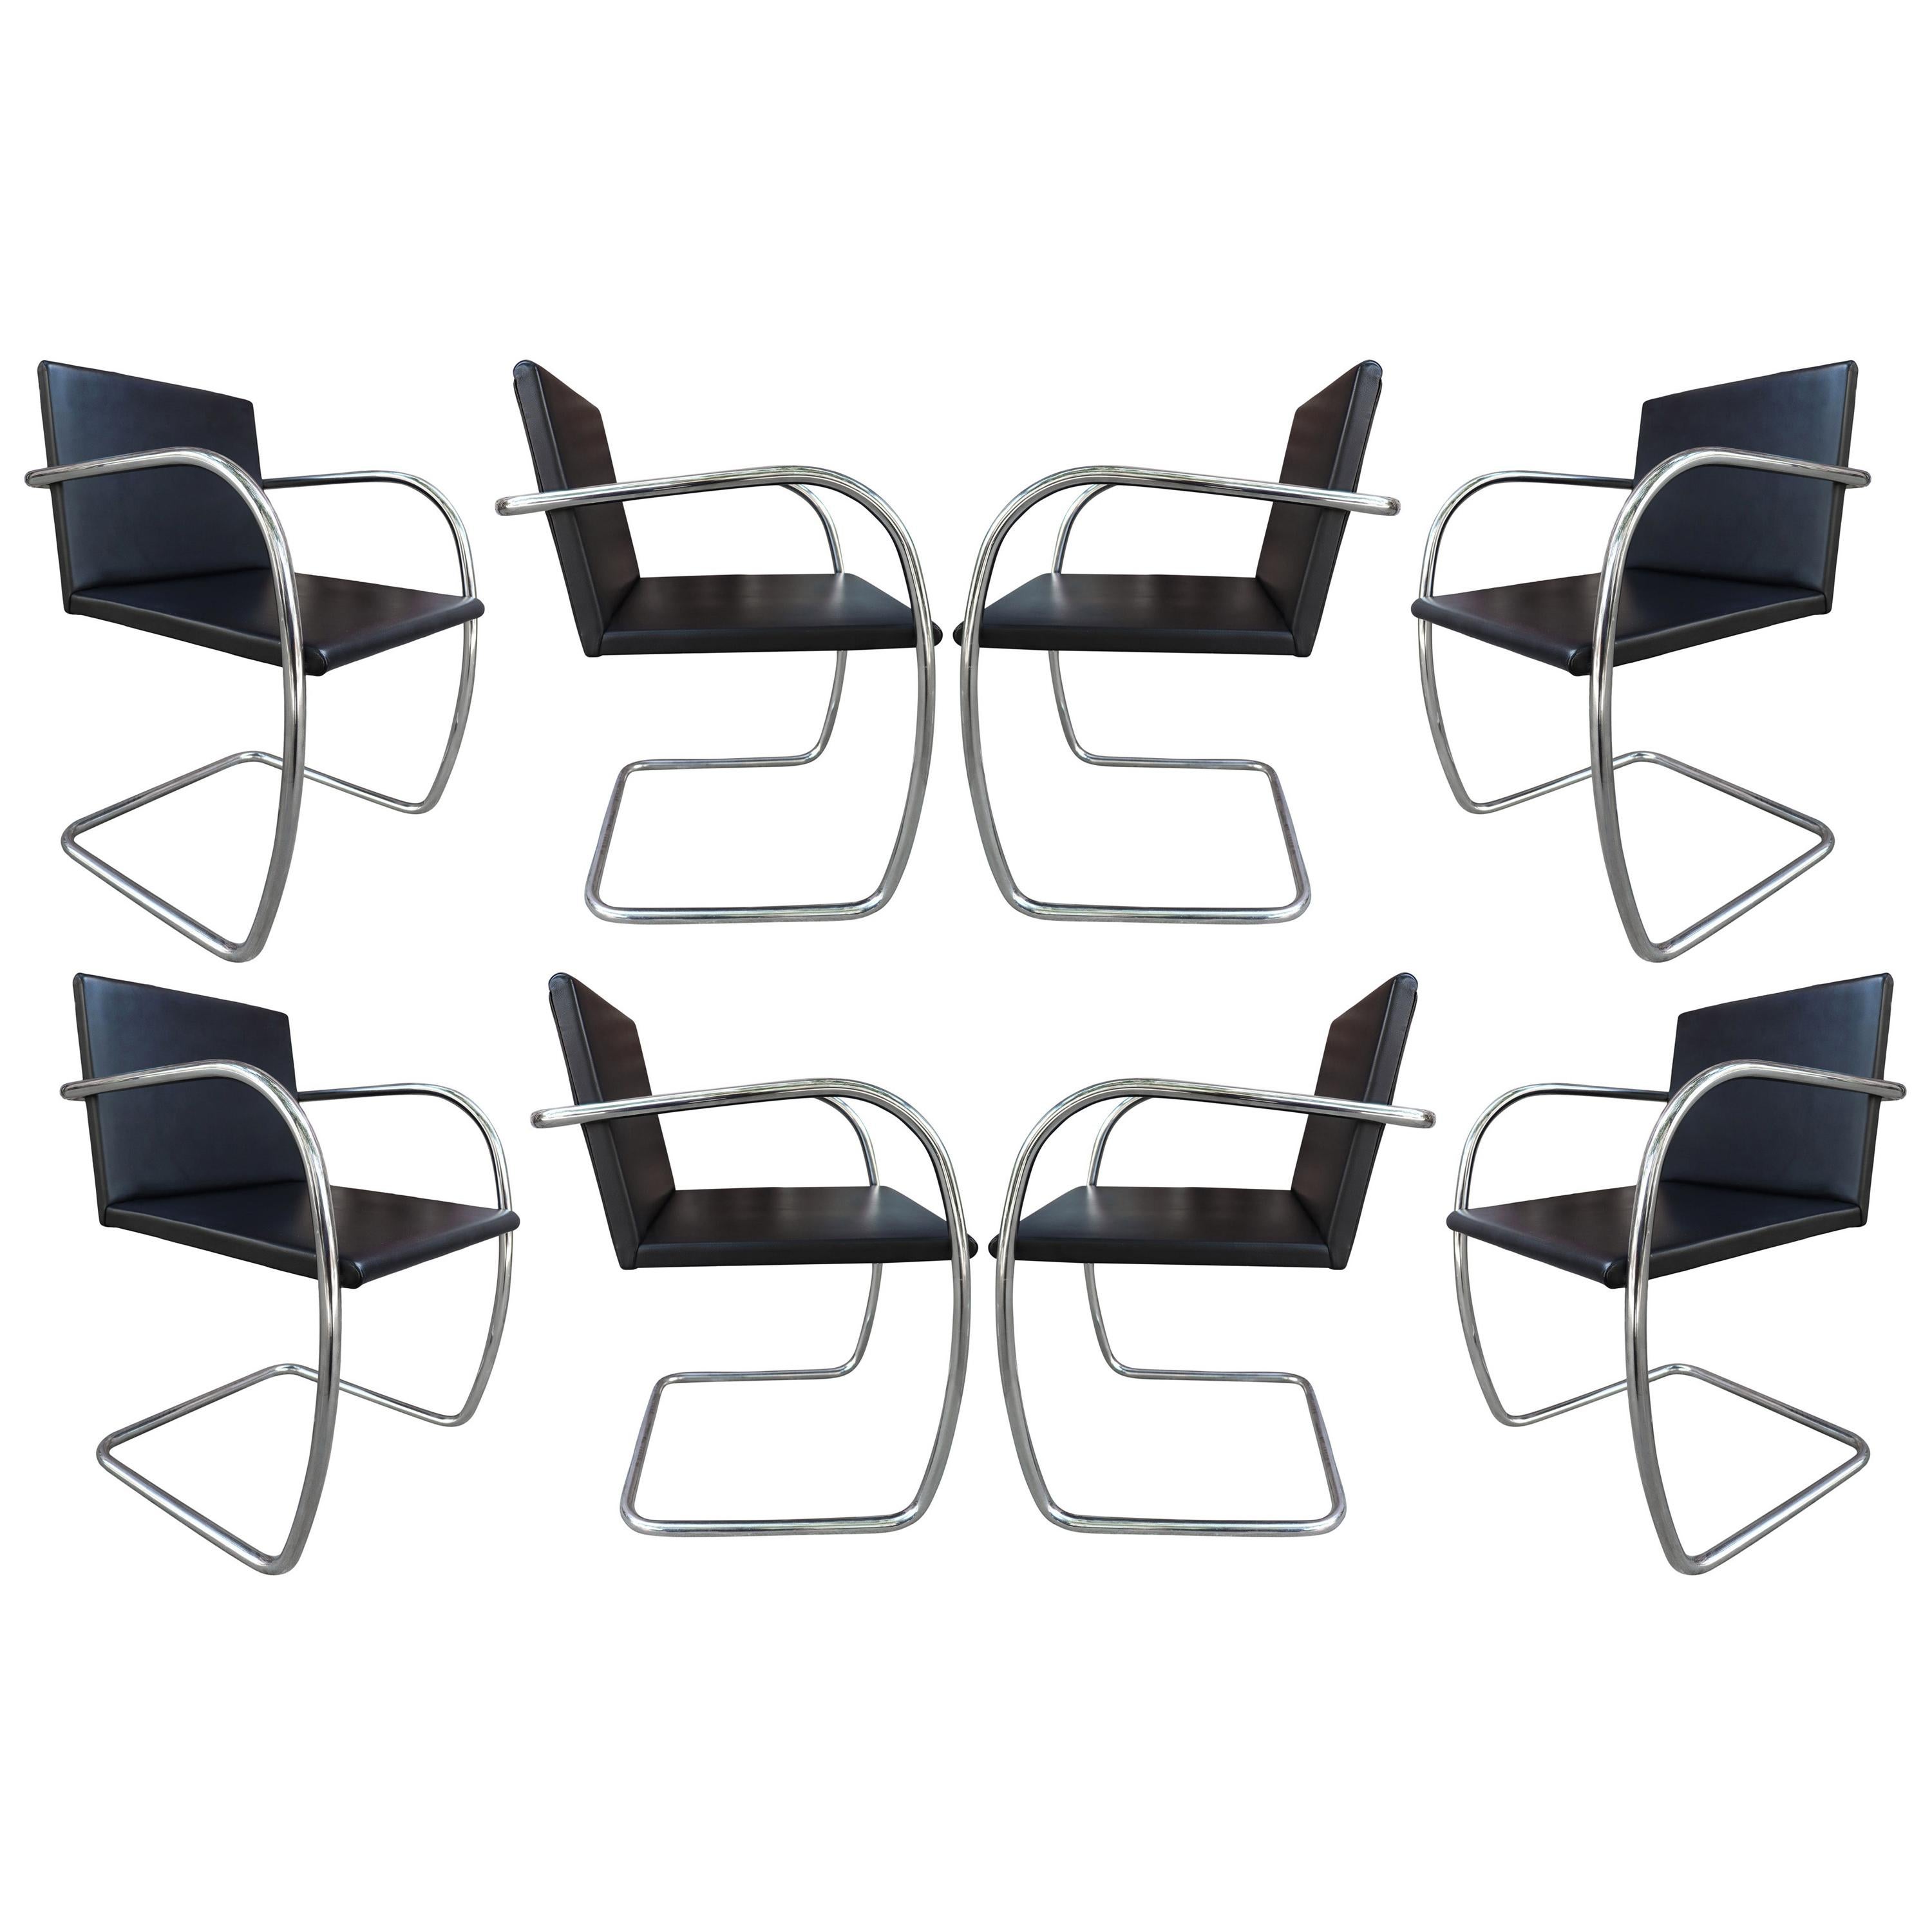 Authentic Set of Eight Midcentury Knoll Brno Chairs by Mies van der Rohe